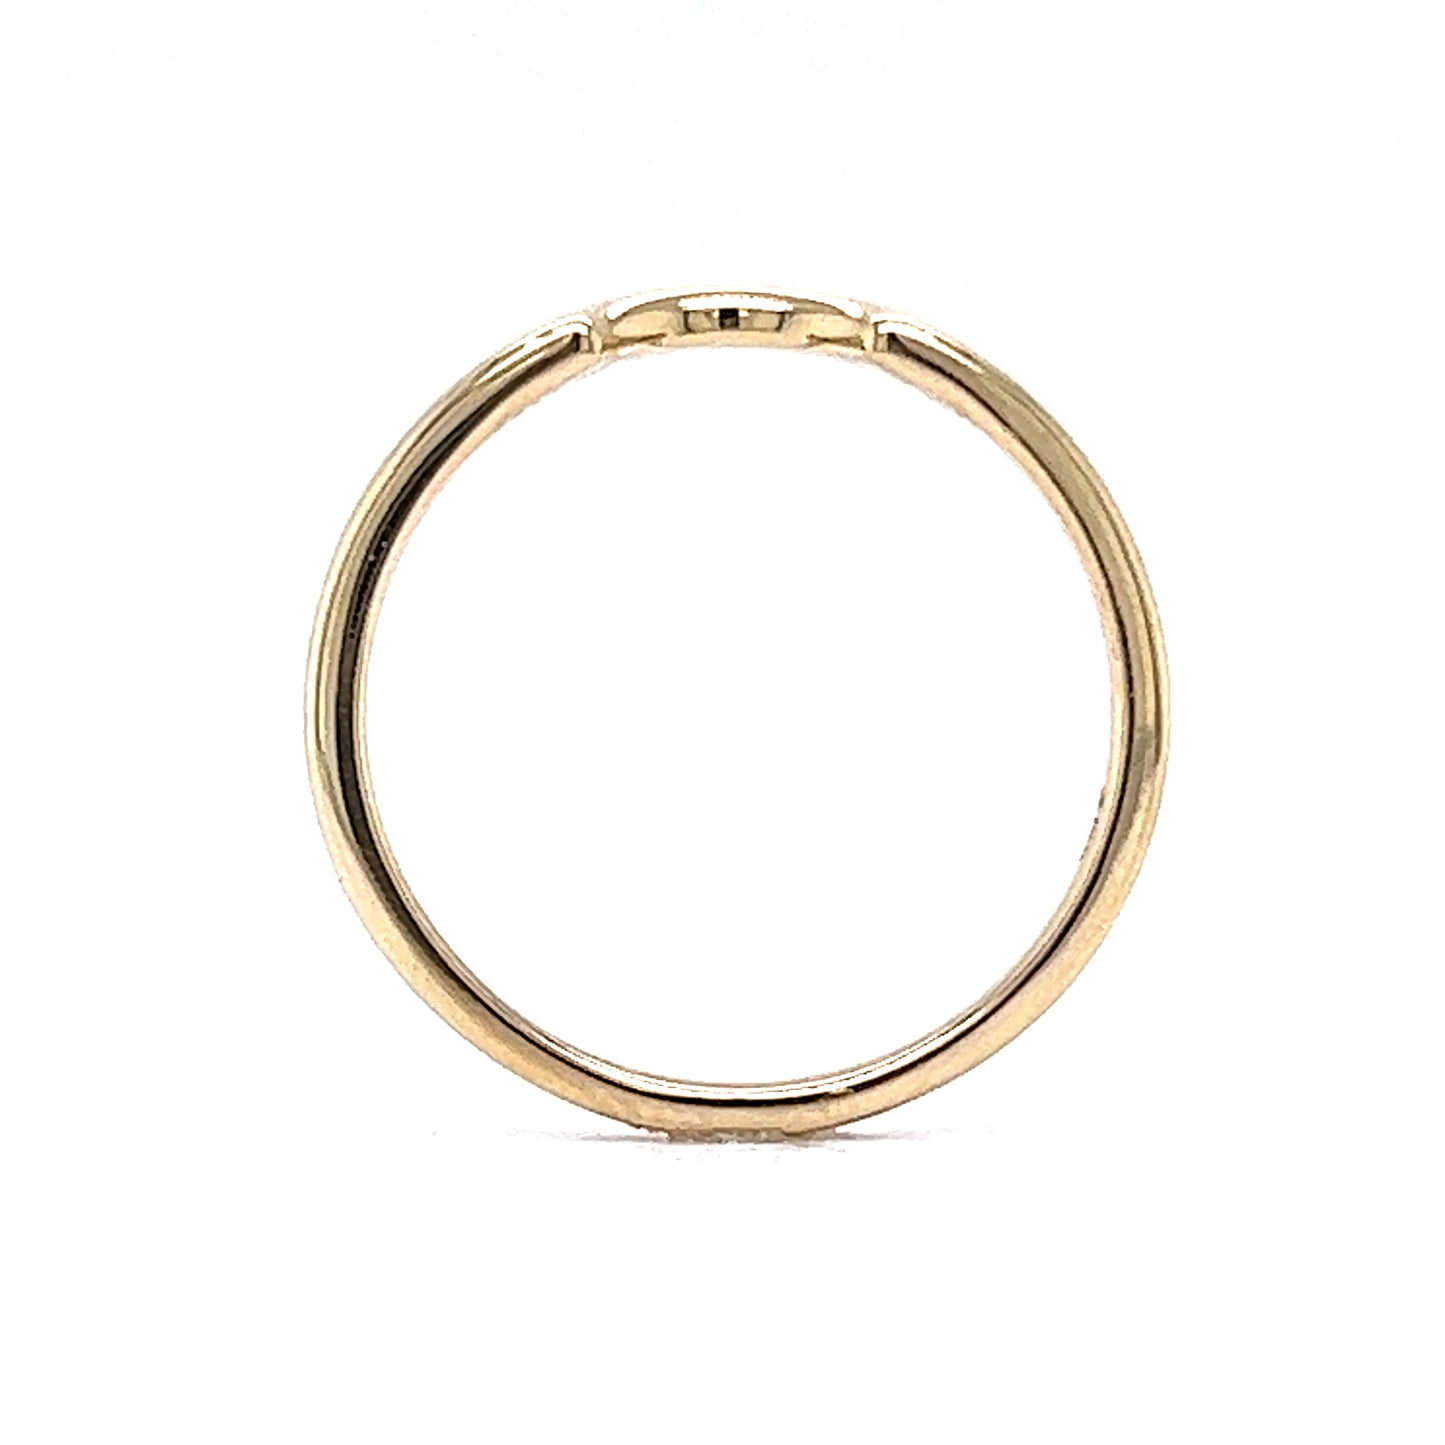 Half Moon Curved Wedding Band in 14k Yellow Gold